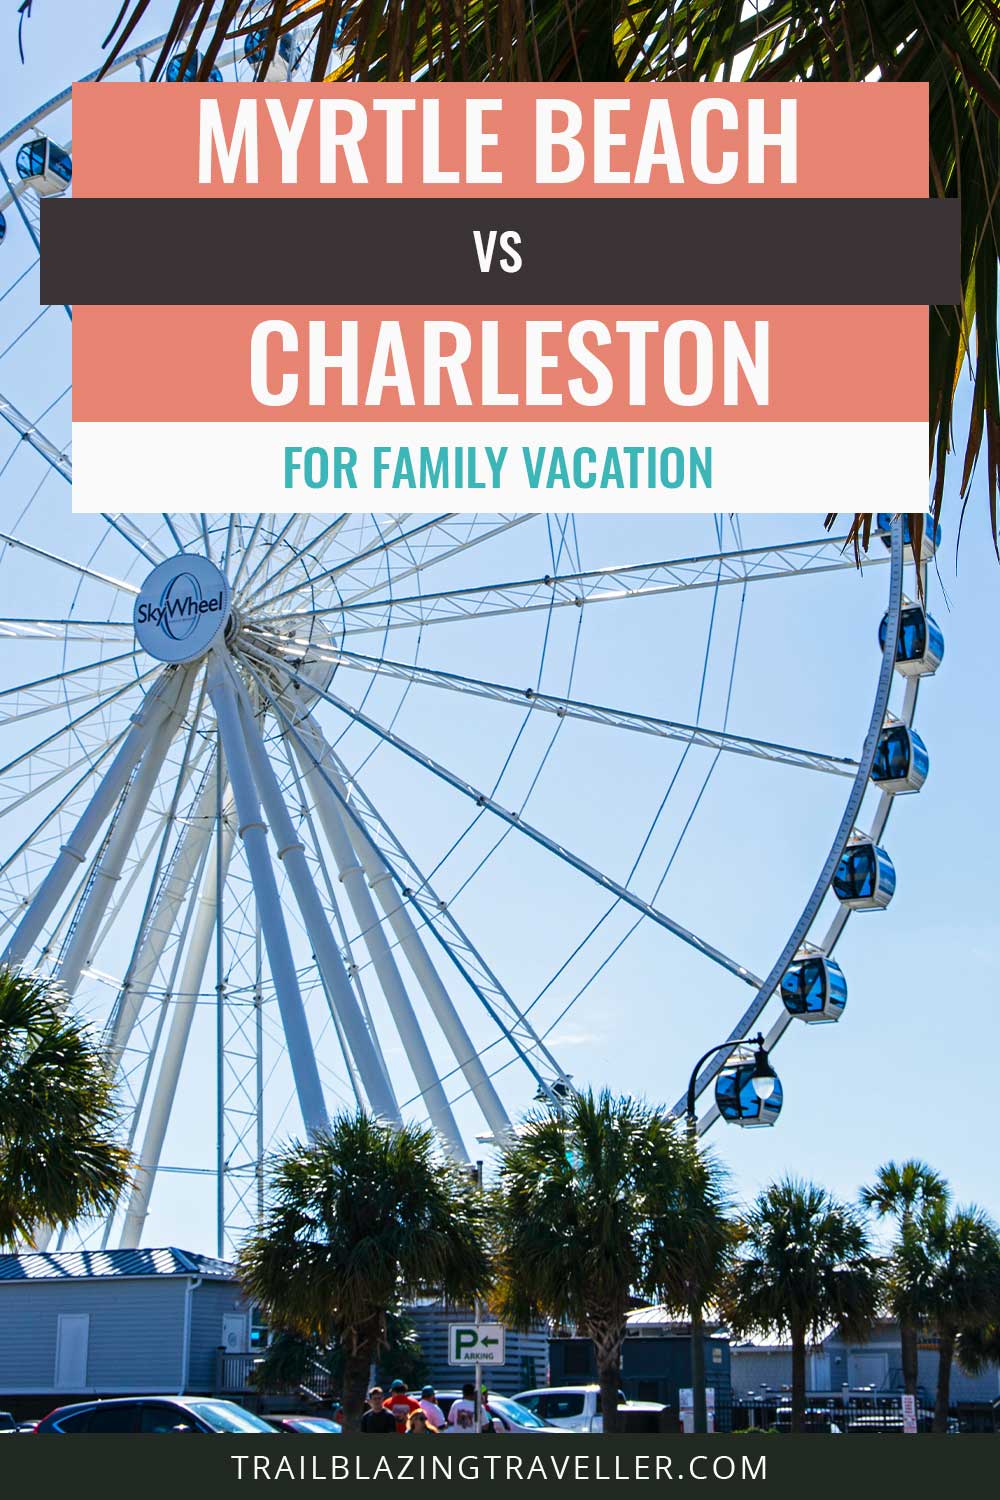 Myrtle Beach vs. Charleston for Family Vacation